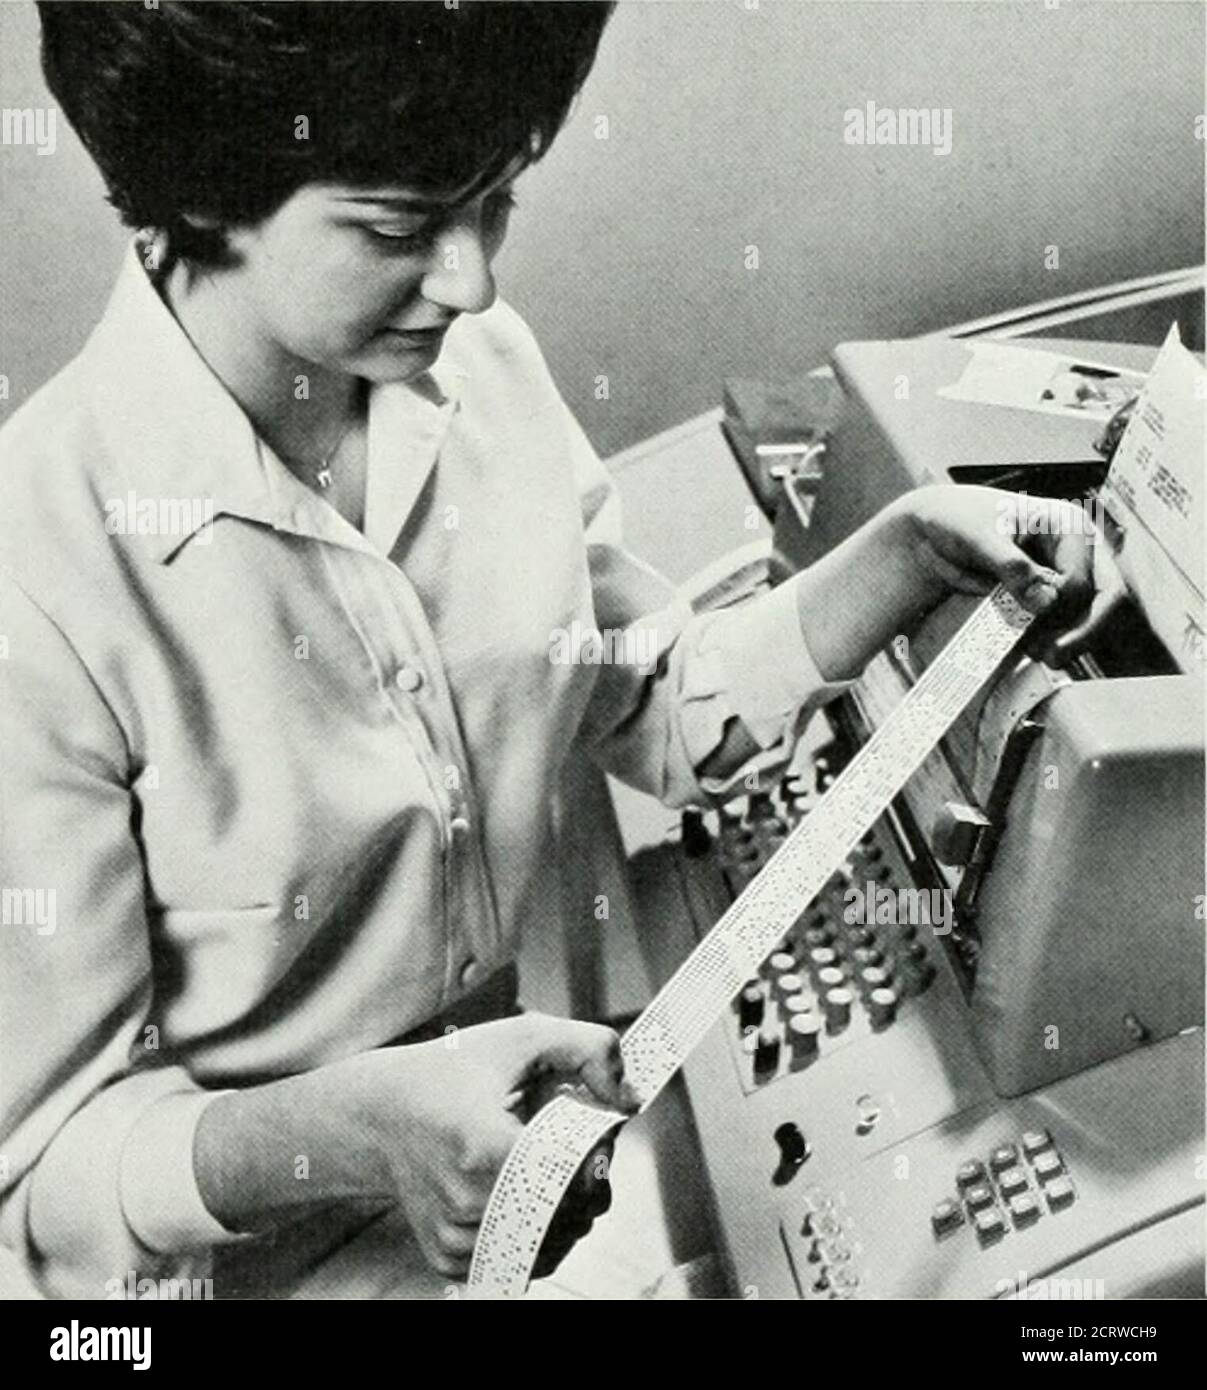 . Bell telephone magazine . Cash management systems can make use of fairlysimple communications media. Even the most sophis-ticated systems we have today got started by utilizingordinary telephone lines. Other examples Ive cited use communications arrangements ranging from tele-typewriter messages down through a service some-times called POTS — plain old telephone service.At the risk of seeming to unsell our most sophisti-cated and advanced services, I feel it best to empha-size how much can be done to expedite the cashmanagement job with even the simplest forms ofcommunications systems. In co Stock Photo